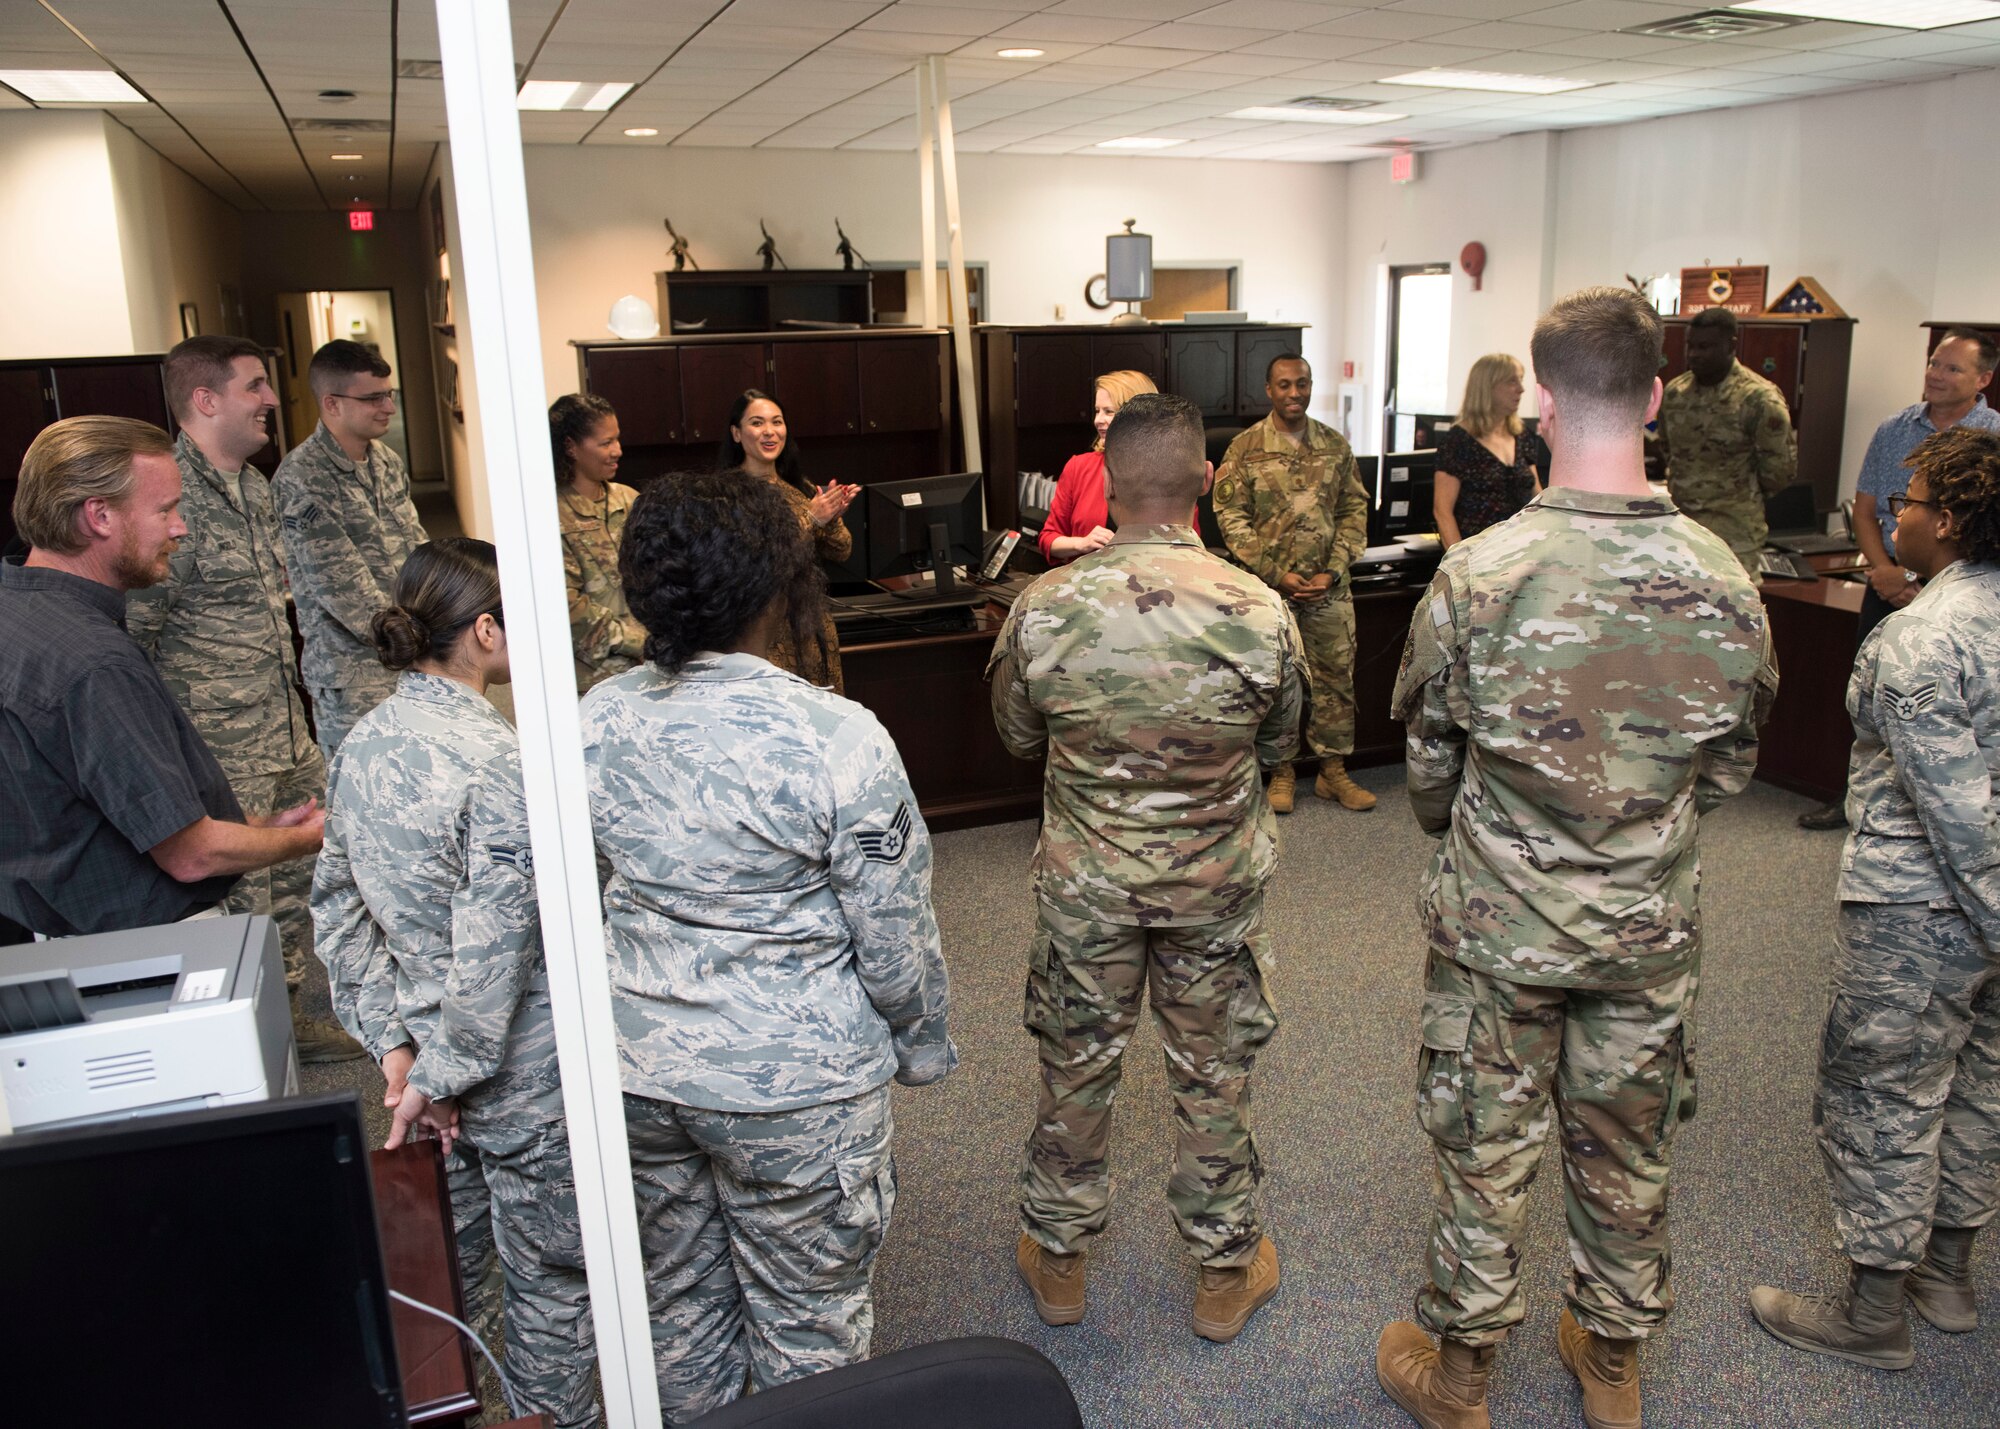 Marilyn M. Thomas, Headquarters U.S. Air Force Principal Deputy Assistant Secretary for Financial Management and Comptroller, meets with members of the 325th Comptroller Squadron May 22, 2019, at Tyndall Air Force Base, Florida.